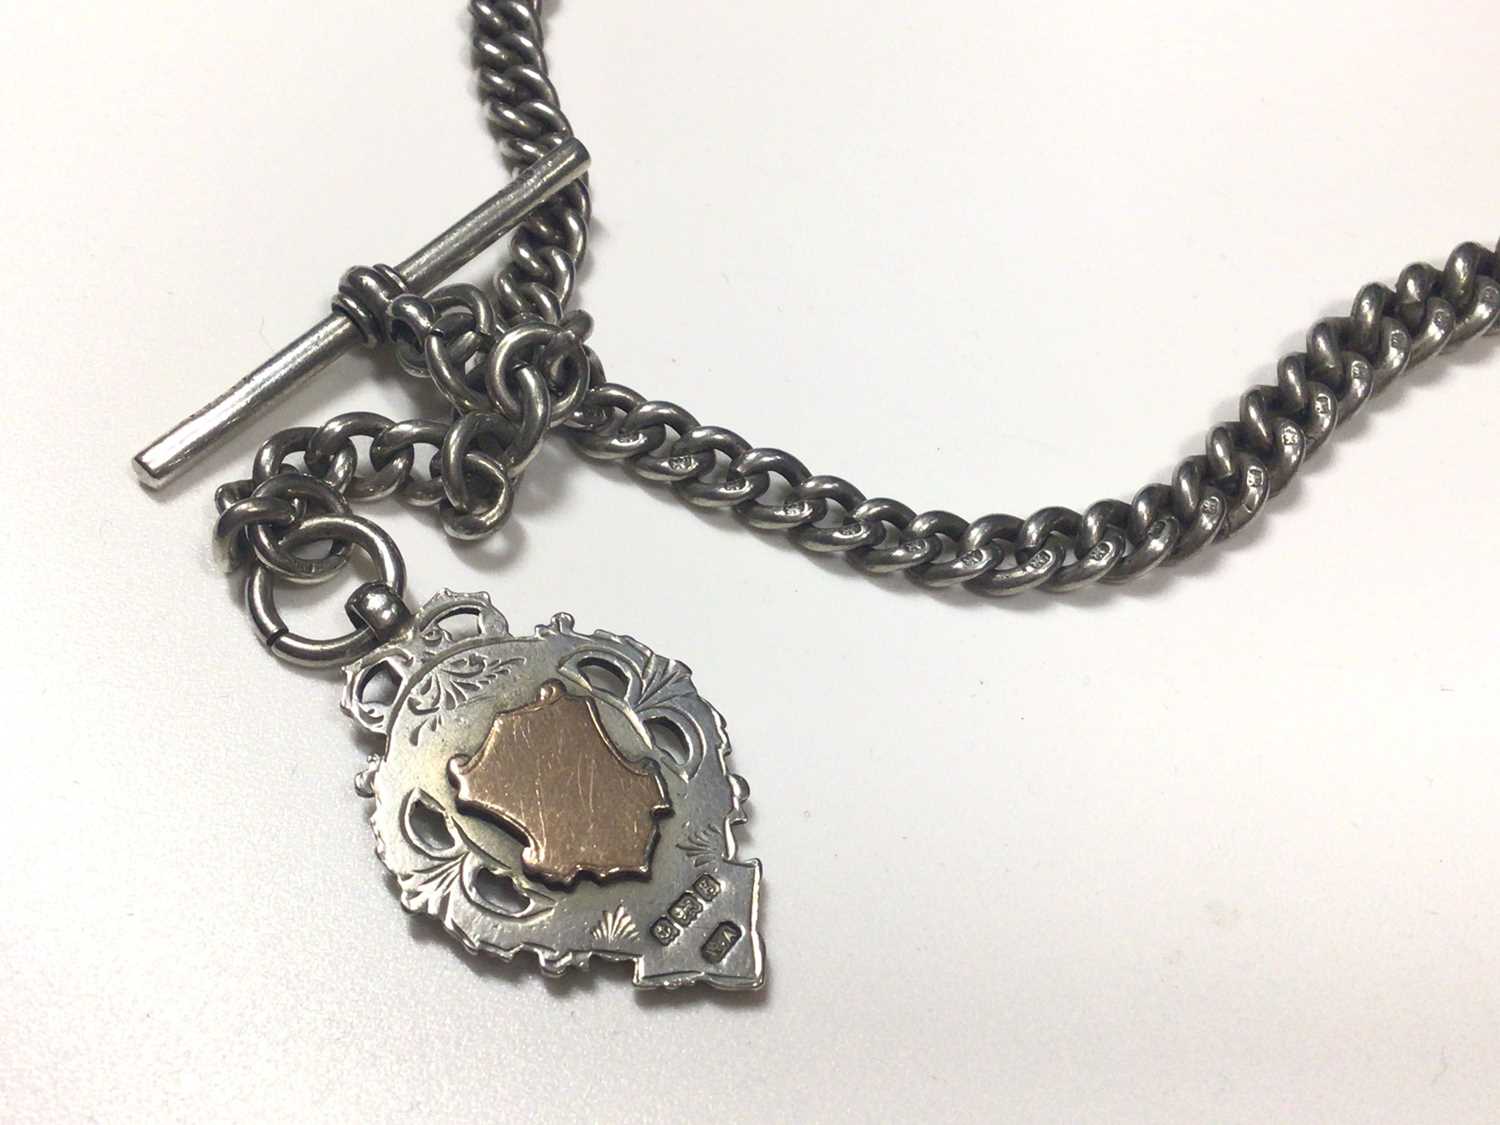 Edwardian silver curb link watch chain/necklace with a silver fob - Image 2 of 3